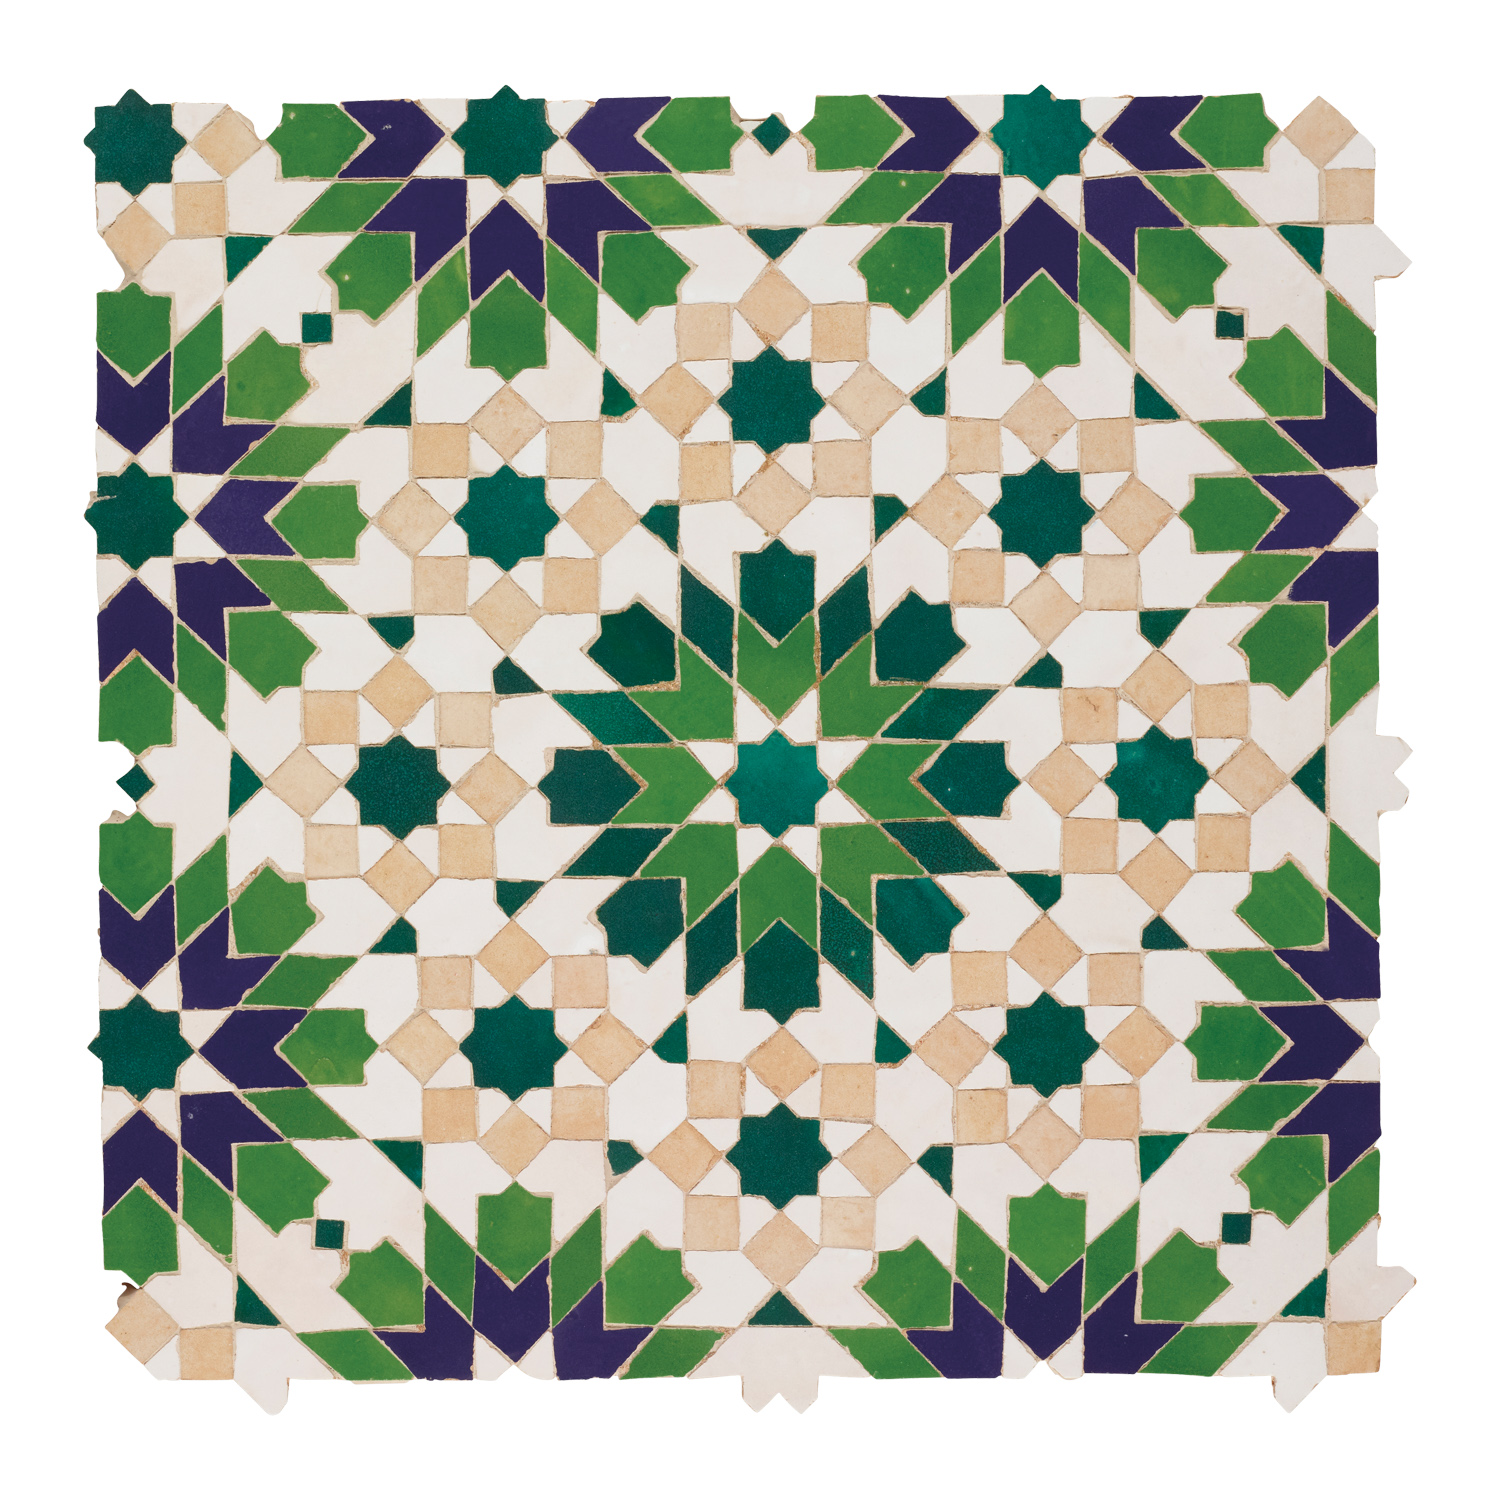 Mosaic tile in green, blue white and cream